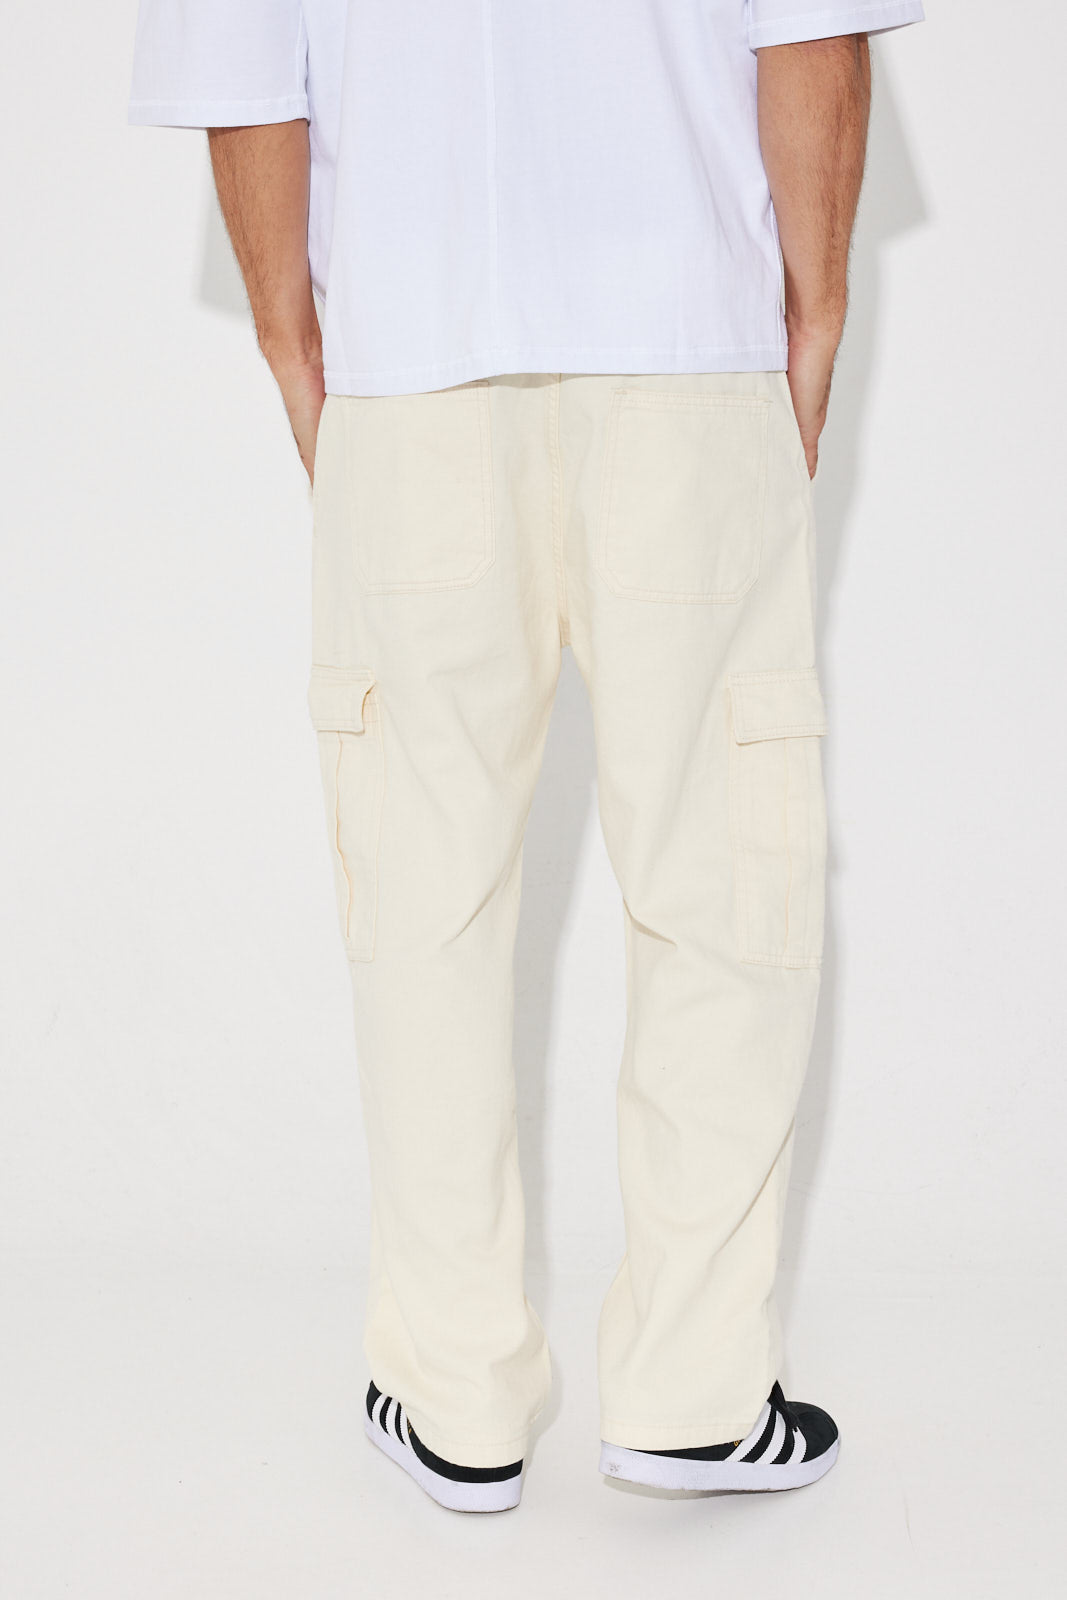 Buy LOUIS PHILIPPE Ivory Mens Slim Fit Solid Formal Trousers | Shoppers Stop